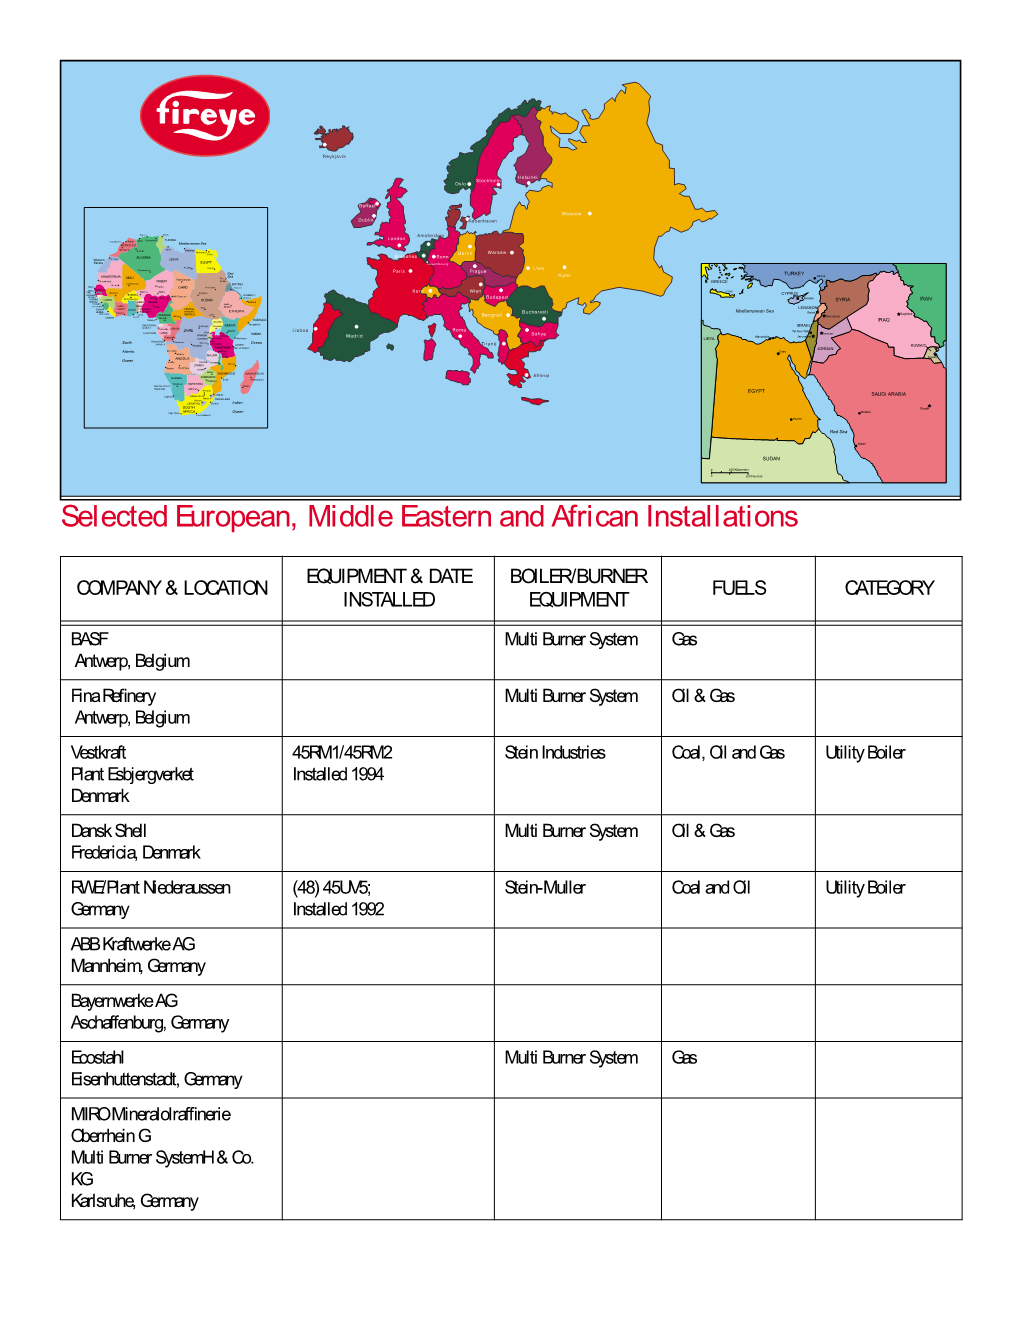 Selected European, Middle Eastern and African Installations